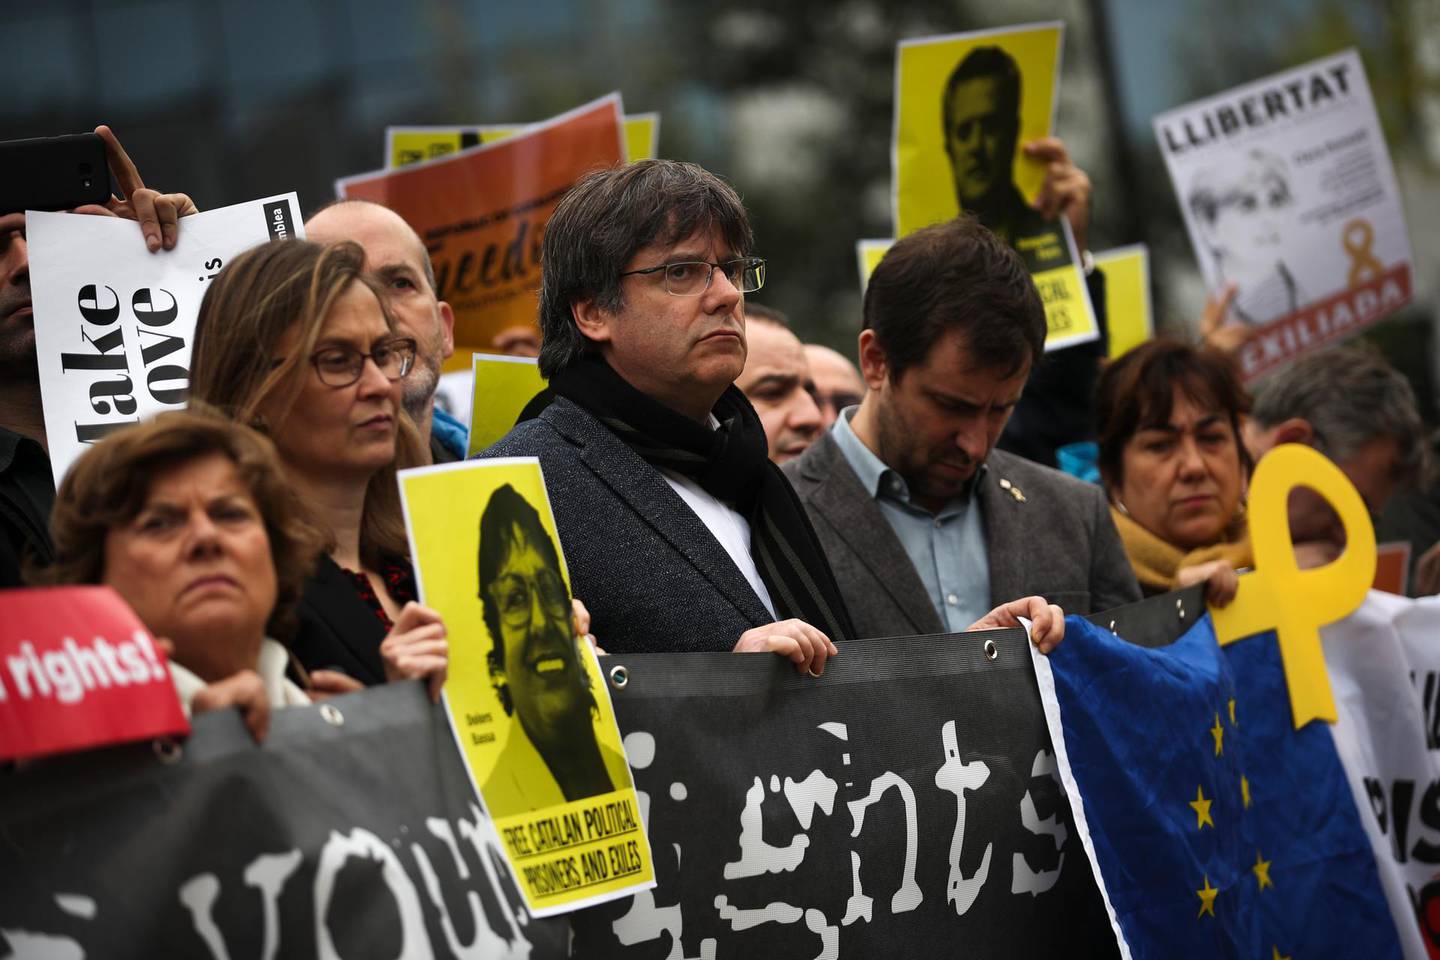 Catalonia's former regional president Carles Puigdemont, center, holds a banner with others during a protest in front of the European Commission headquarters in Brussels, Tuesday, Oct. 15, 2019. New disruptions to Catalonia's transportation network on Tuesday followed a night of clashes between activists and police over the conviction of separatist leaders, as Spanish authorities announced an investigation into the group organizing the protests. (AP Photo/Francisco Seco)